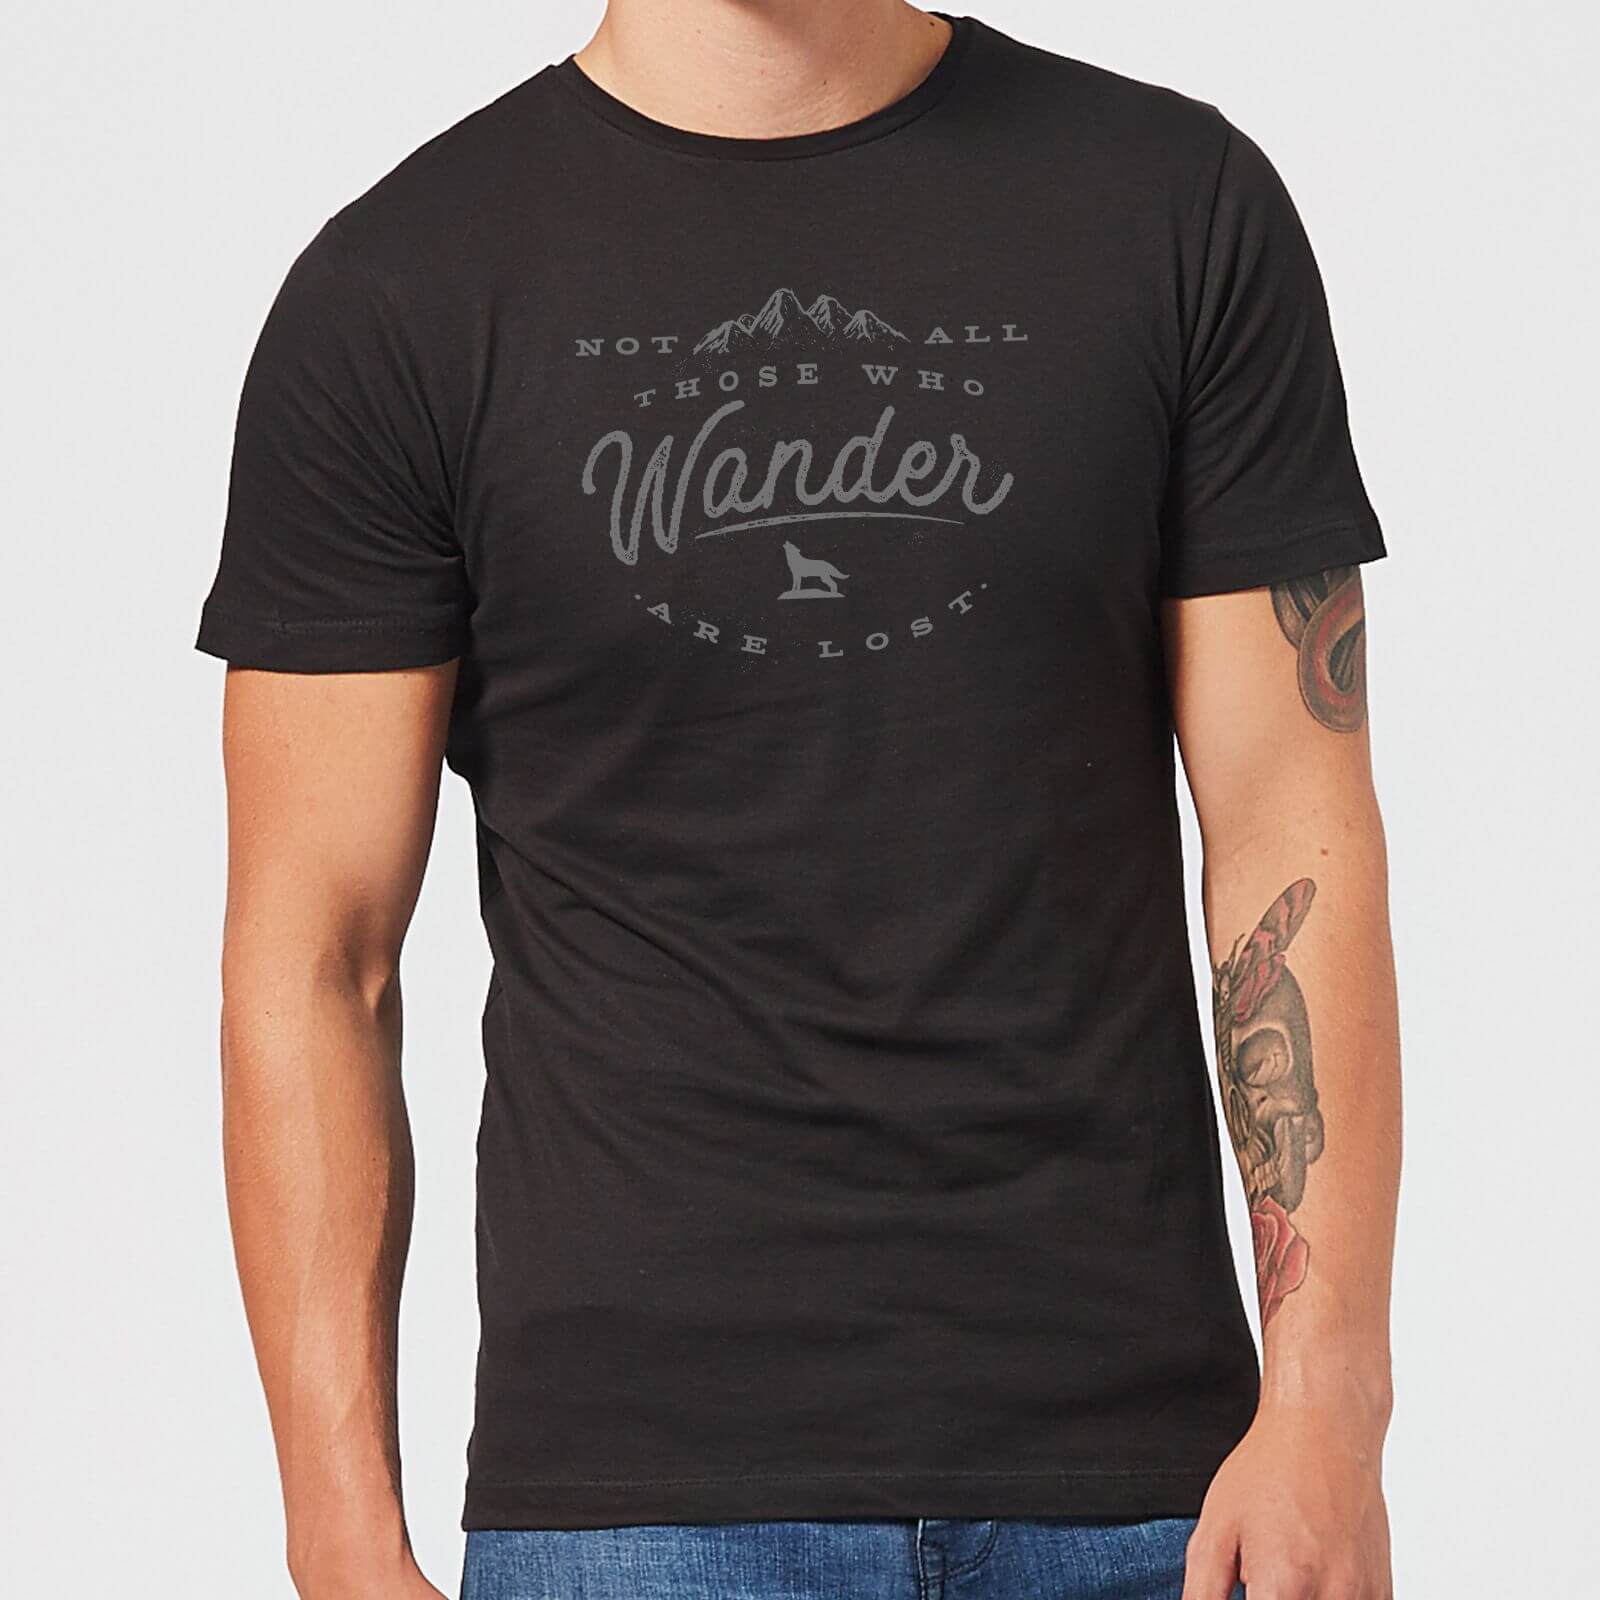 Not All Those Who Wander Are Lost Men's T-Shirt - Black - S - Black